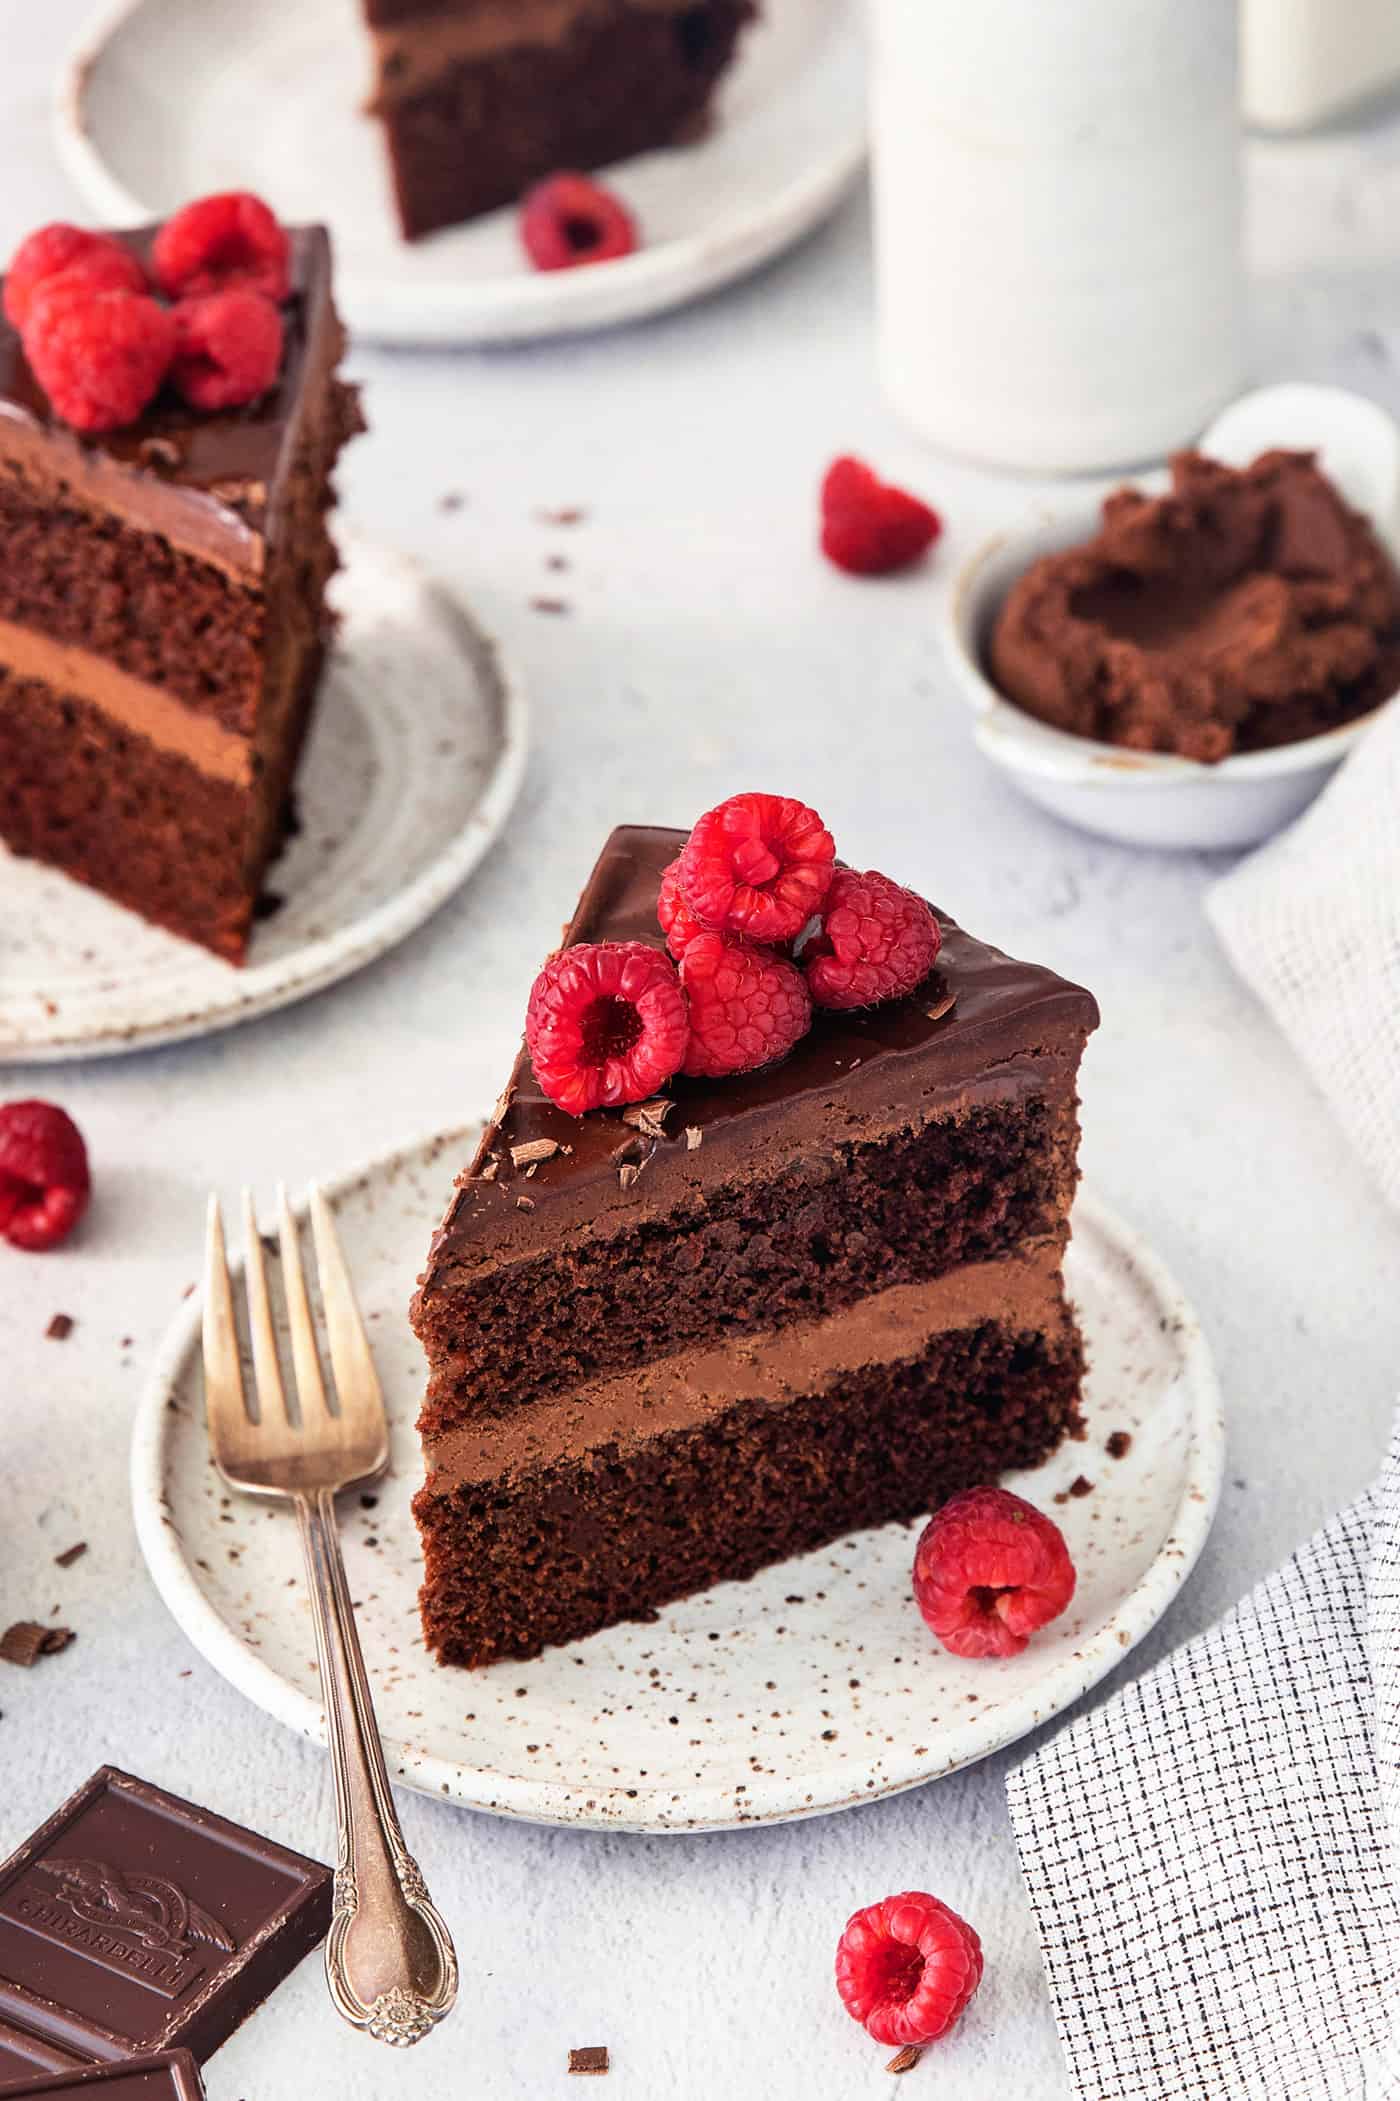 Raspberry-topped slices of chocolate ganache cake are shown on white plates on a table.